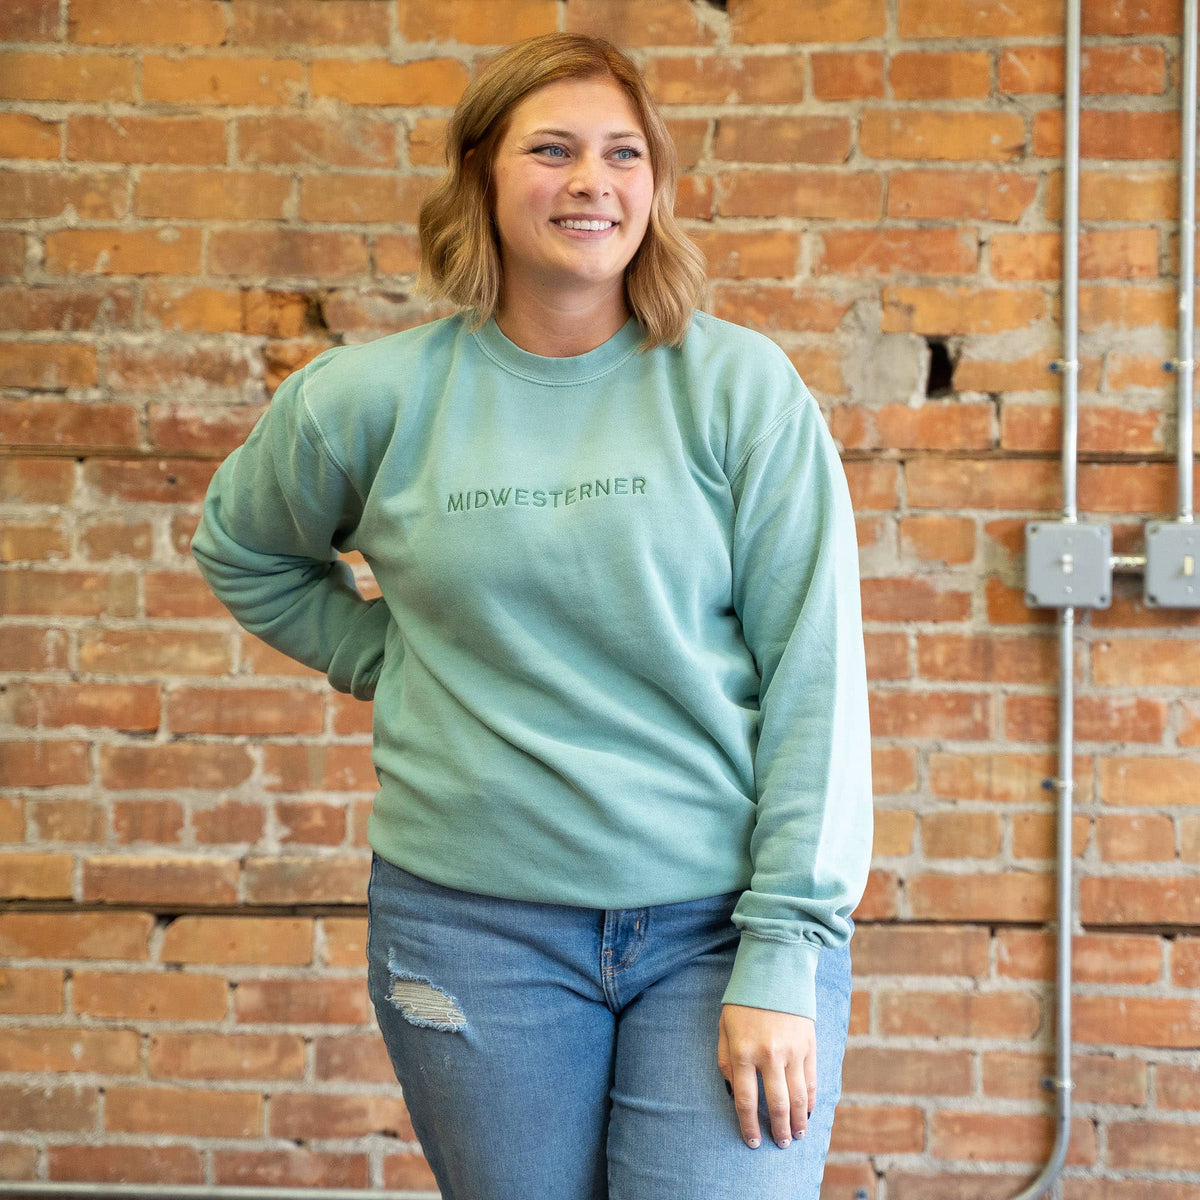 Midwesterner Mint Embroidered Sweatshirt